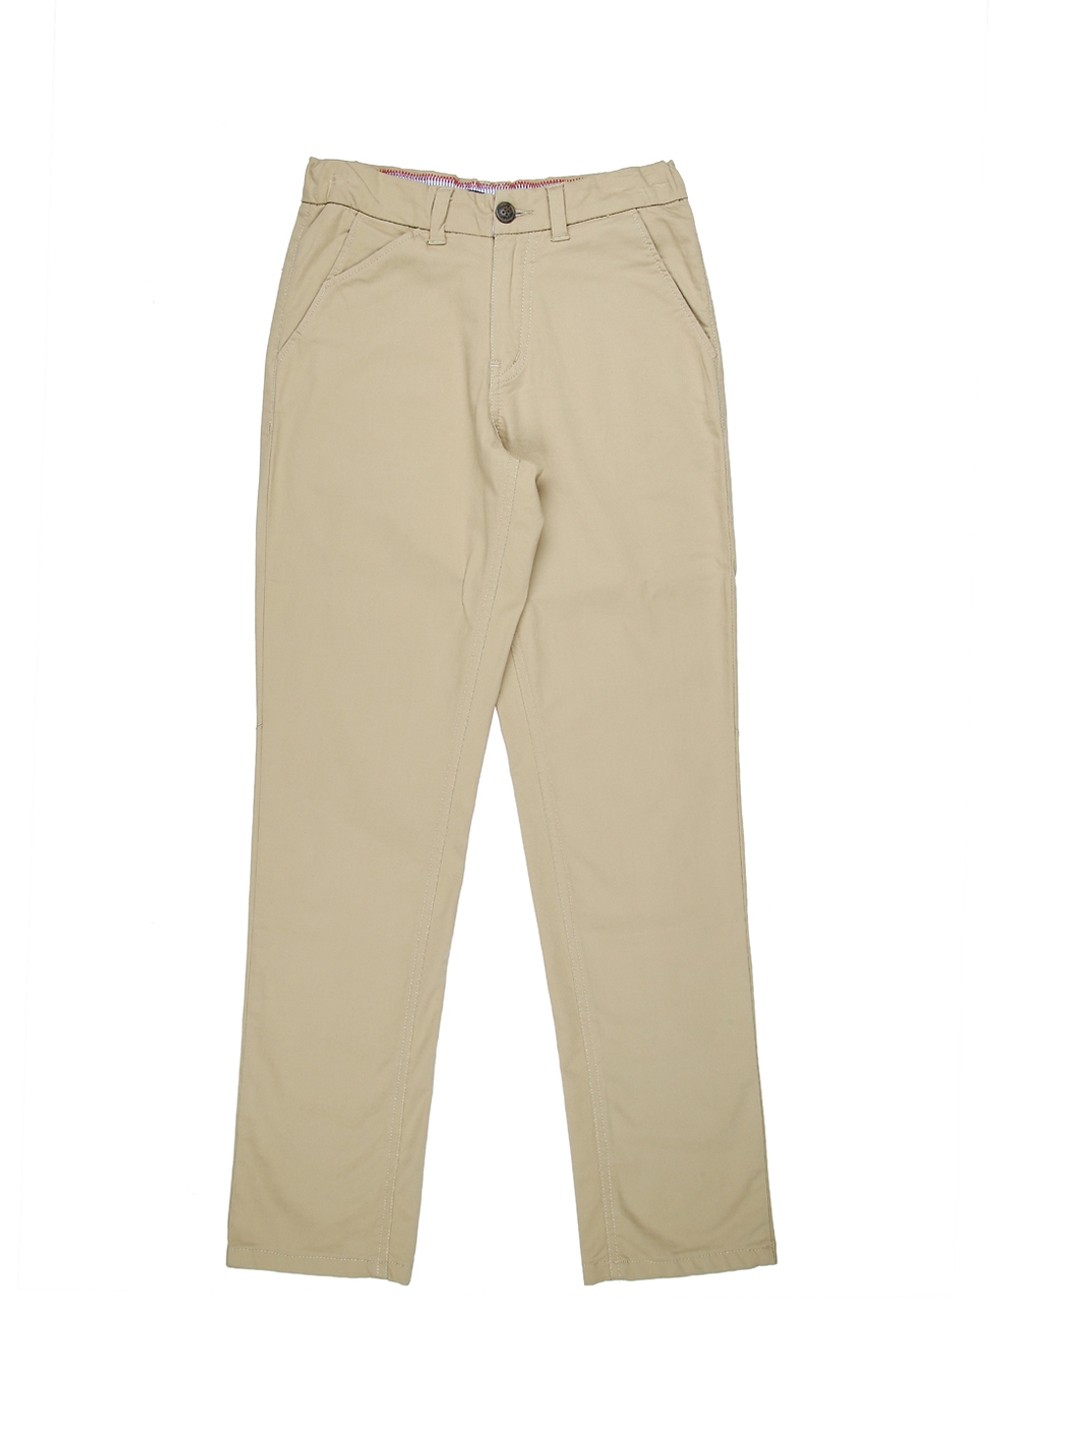 Buy Gini And Jony Boys Beige Regular Fit Solid Formal Trousers ...